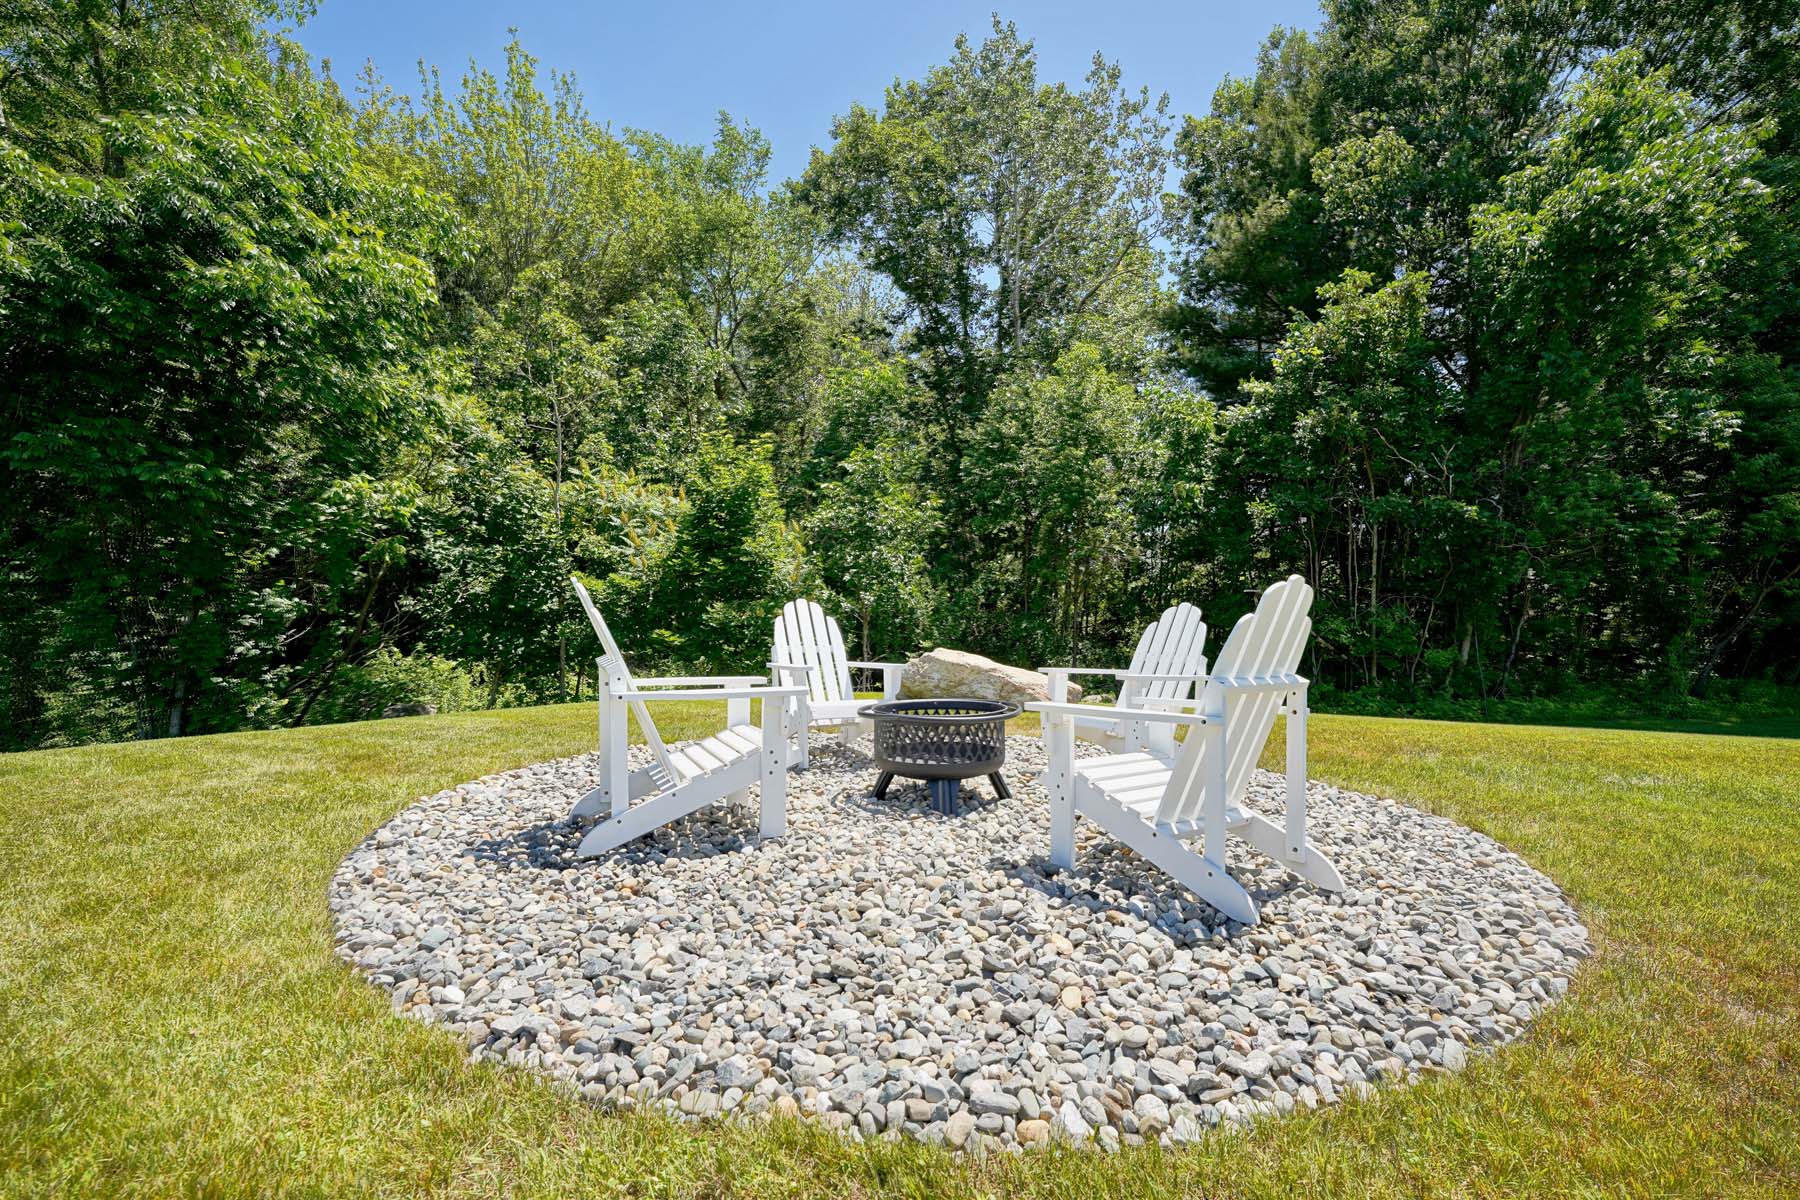 seating area surrounding a fire pit with grass and trees